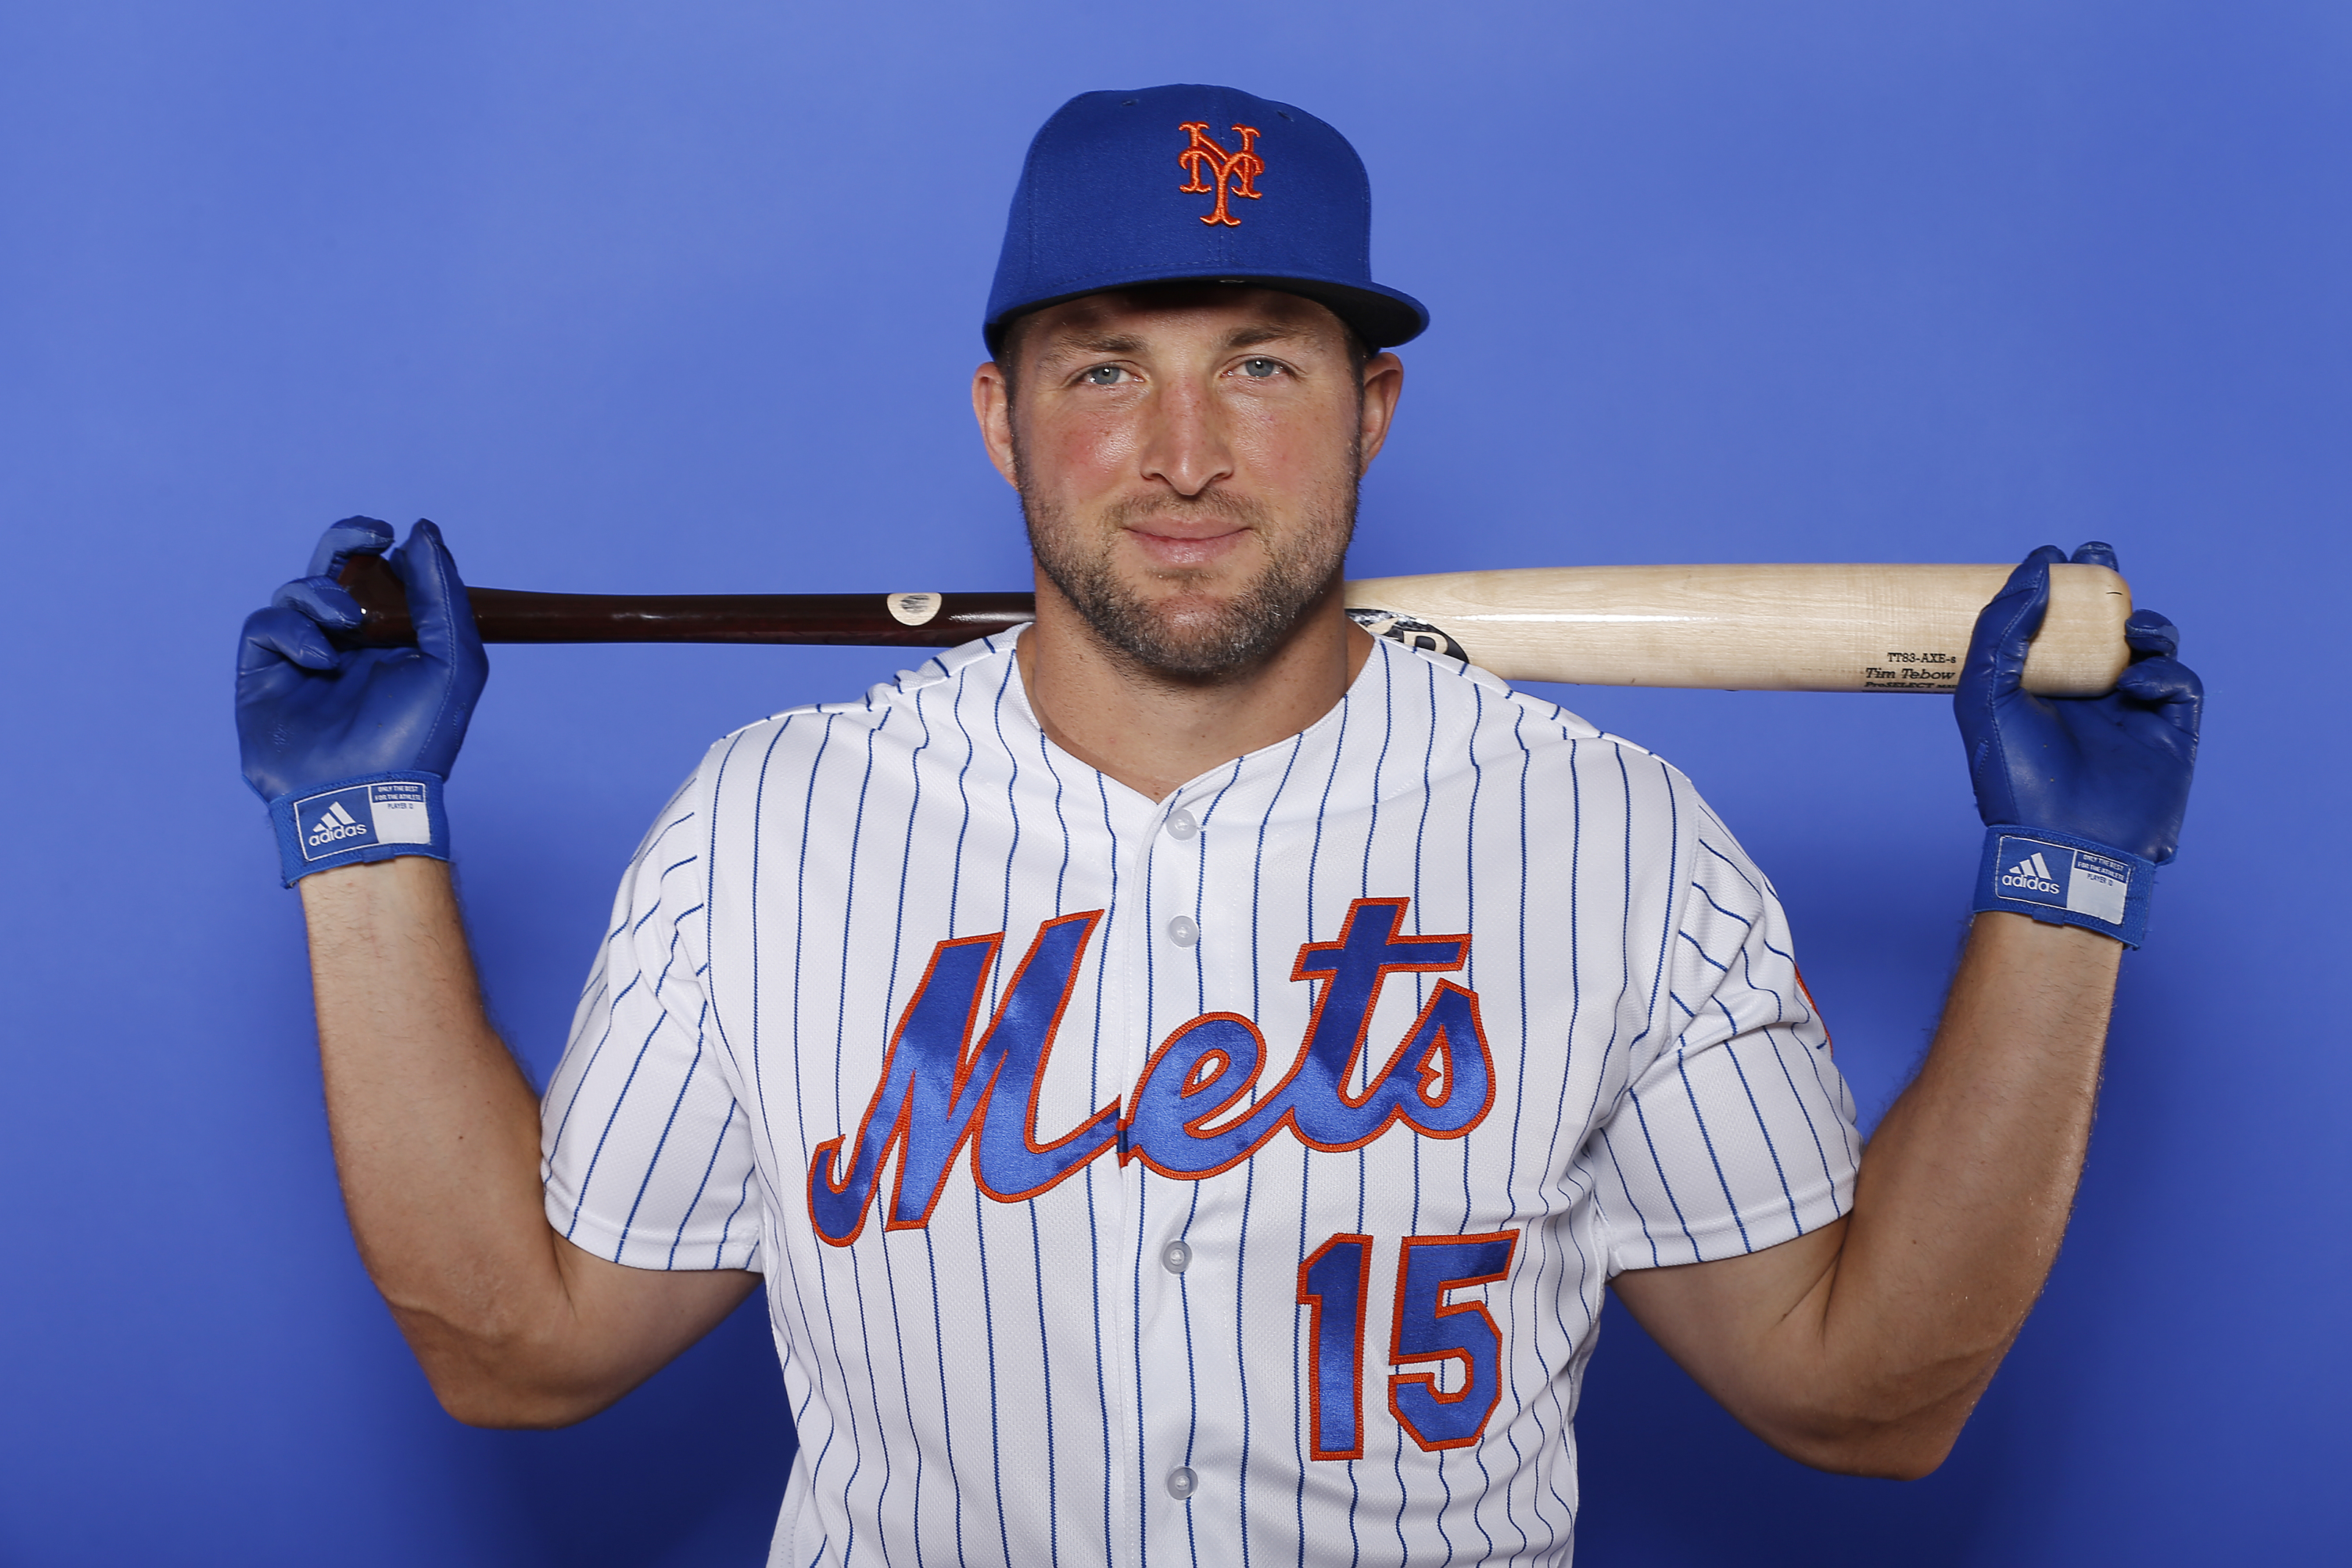 Meet the Syracuse Mets fan who spent $890 on a Tim Tebow jersey